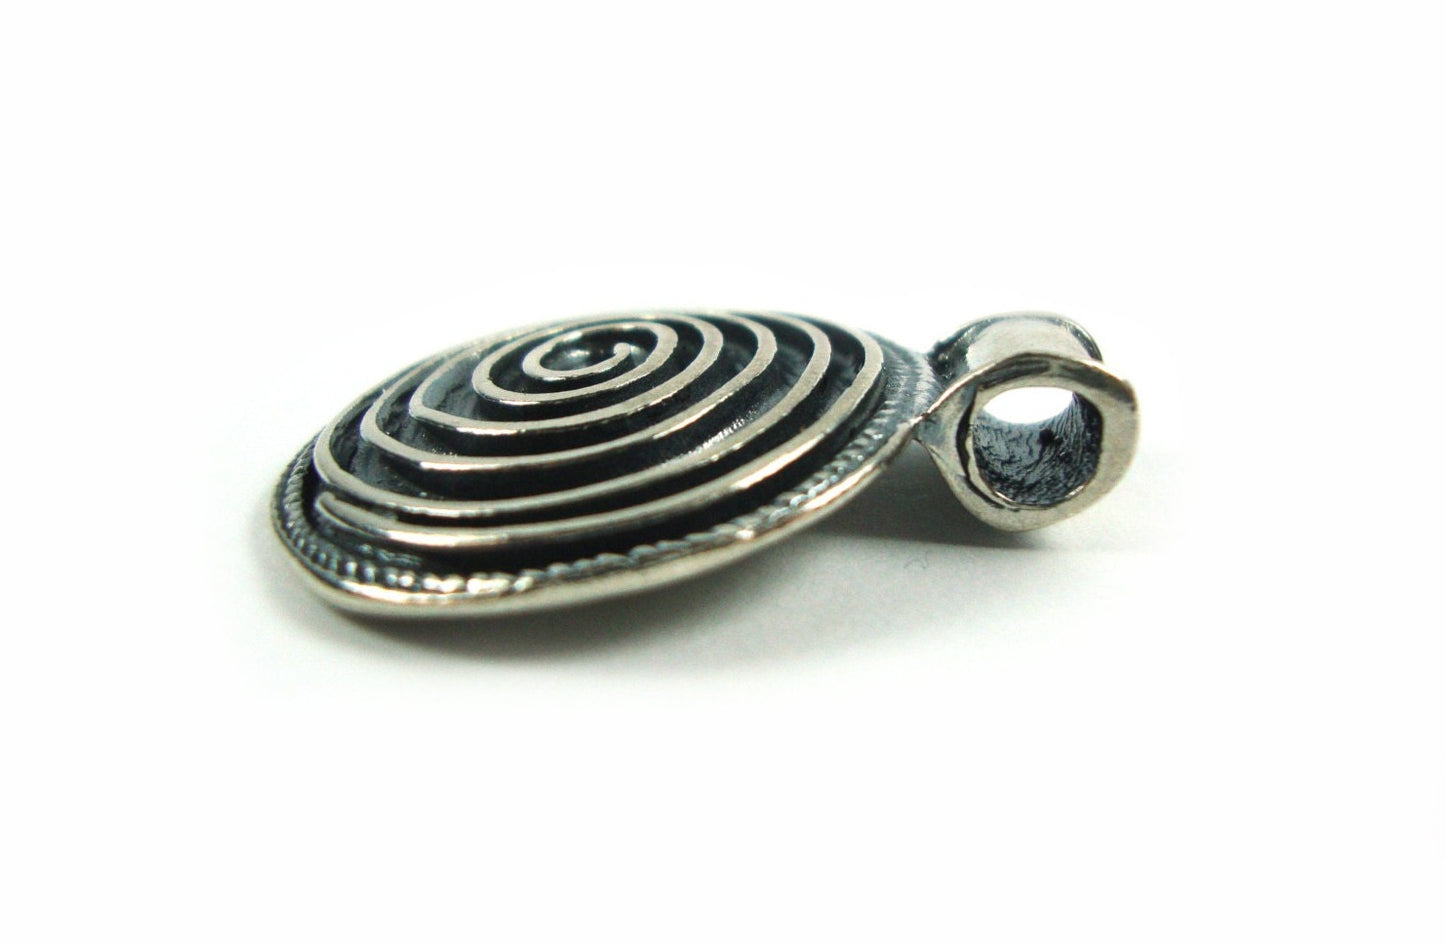 Oval Spiral Oxidized Silver Pendant 21x30mm | -50% OFF